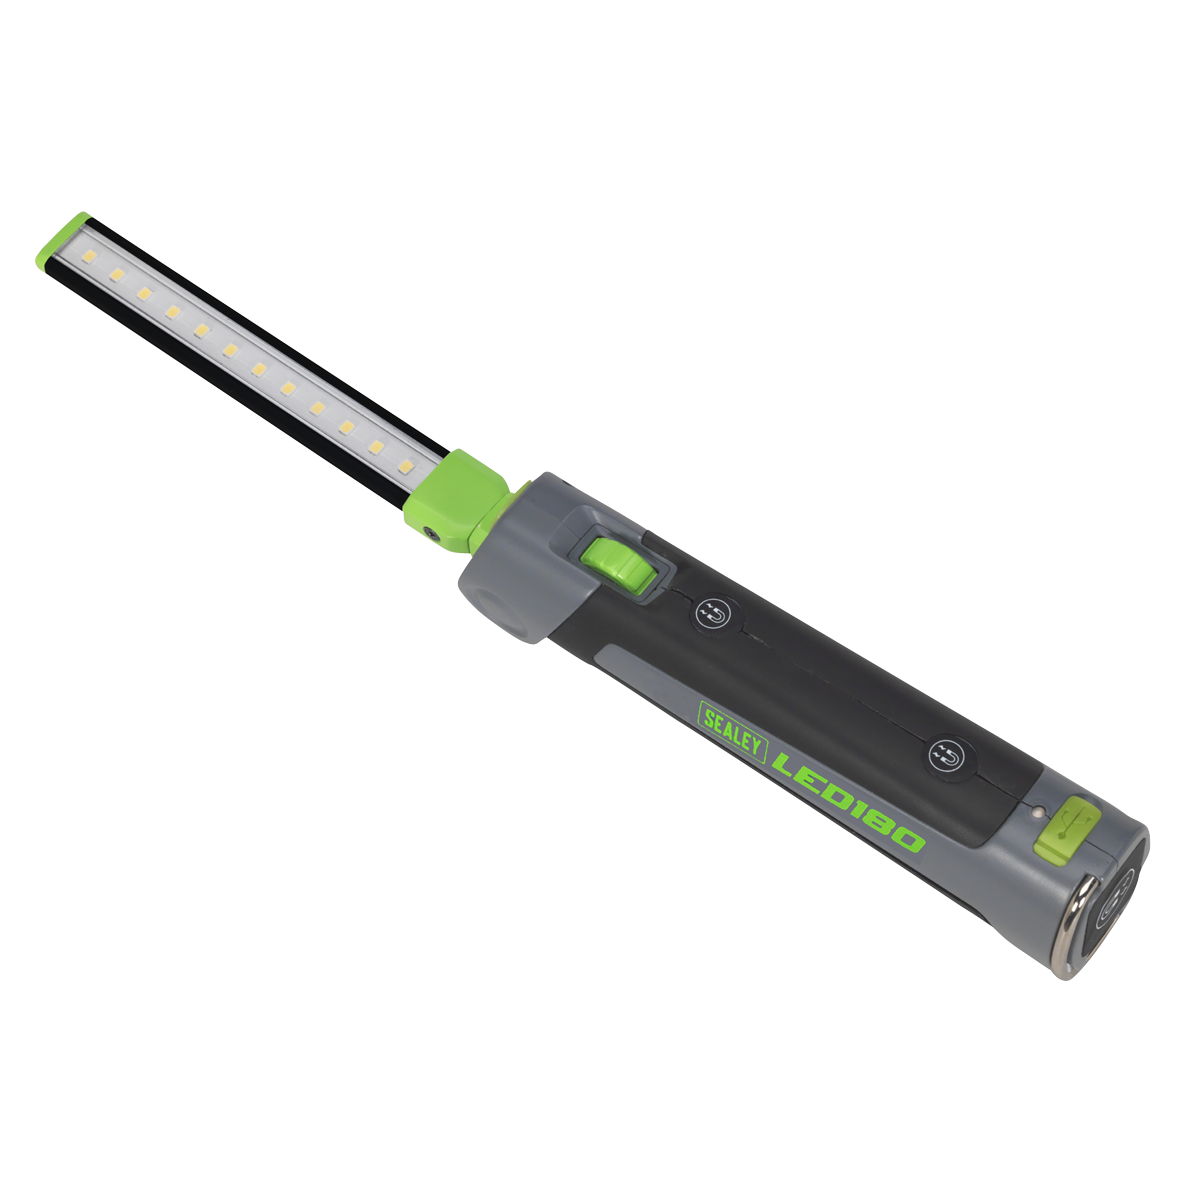 Rechargeable Slim Folding Inspection Light 4W & 1W SMD LED Lithium-ion - LED180 - Farming Parts